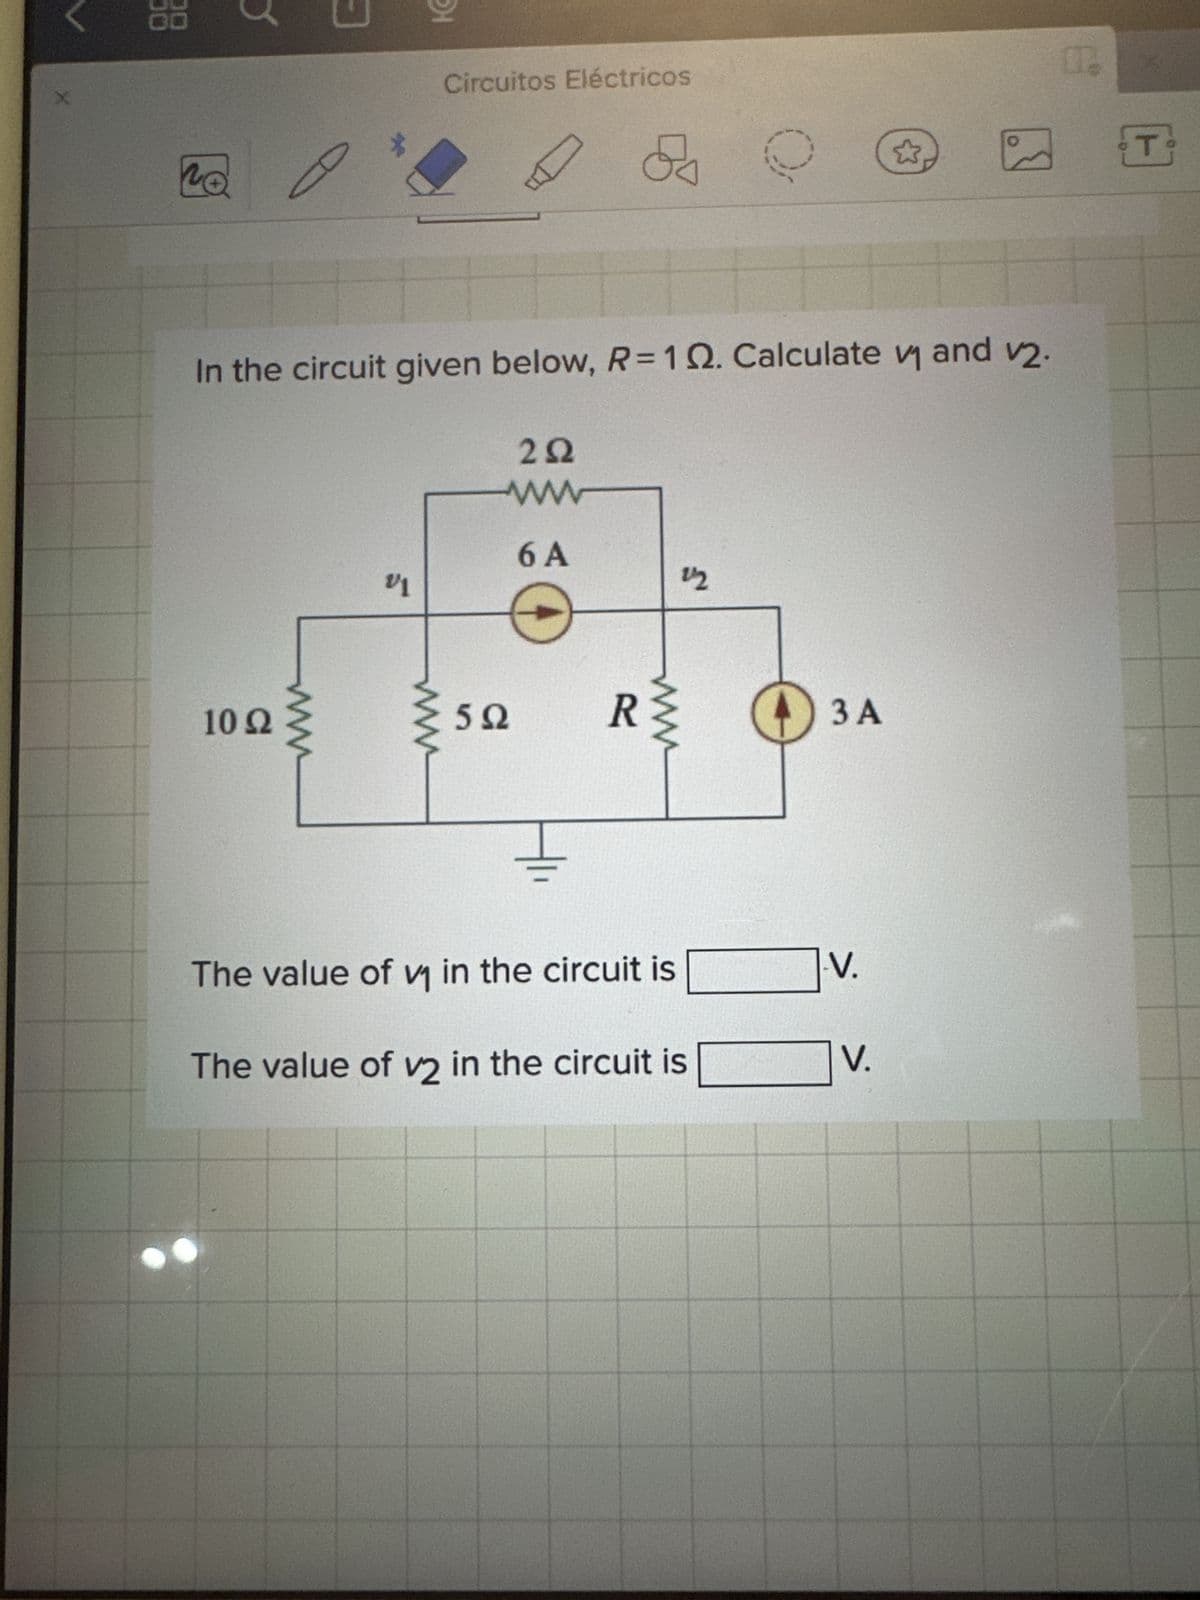 88
Lo
1092
DI
v1
Circuitos Eléctricos
www
In the circuit given below, R=102. Calculate v₁ and v₂.
252
www
6 A
592
os
Ţ
R
22
The value of v₁ in the circuit is
The value of v2 in the circuit is
3 A
].V.
3
V.
O
P
T